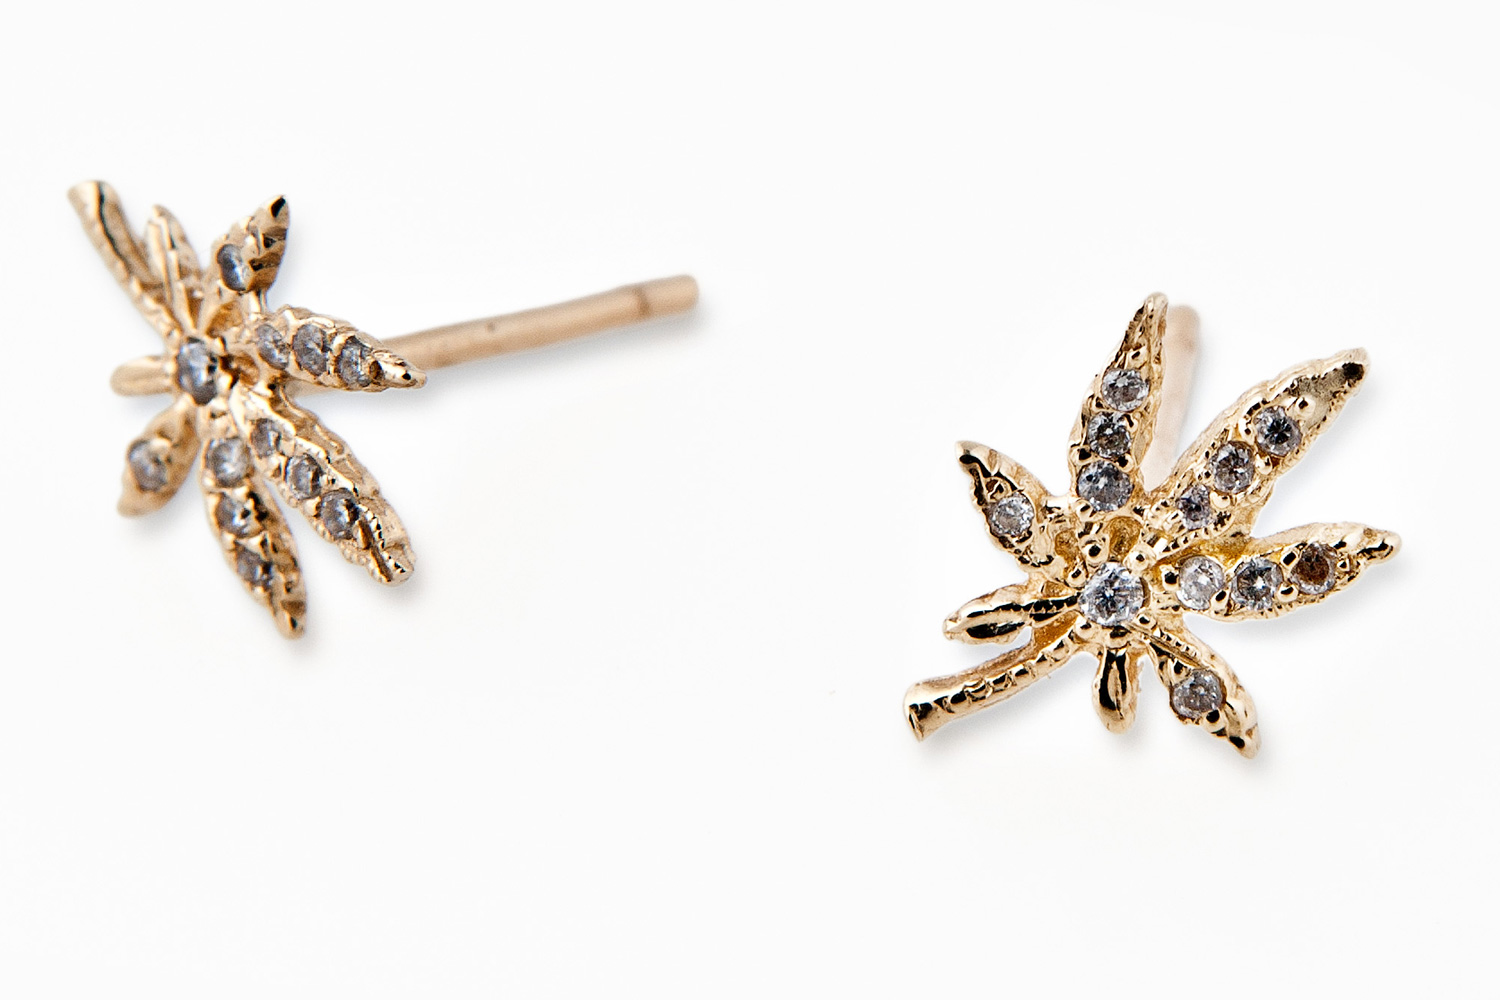 Pot leaf chic: Jewelry designer Jacquie Aiche gives ganja golden touch